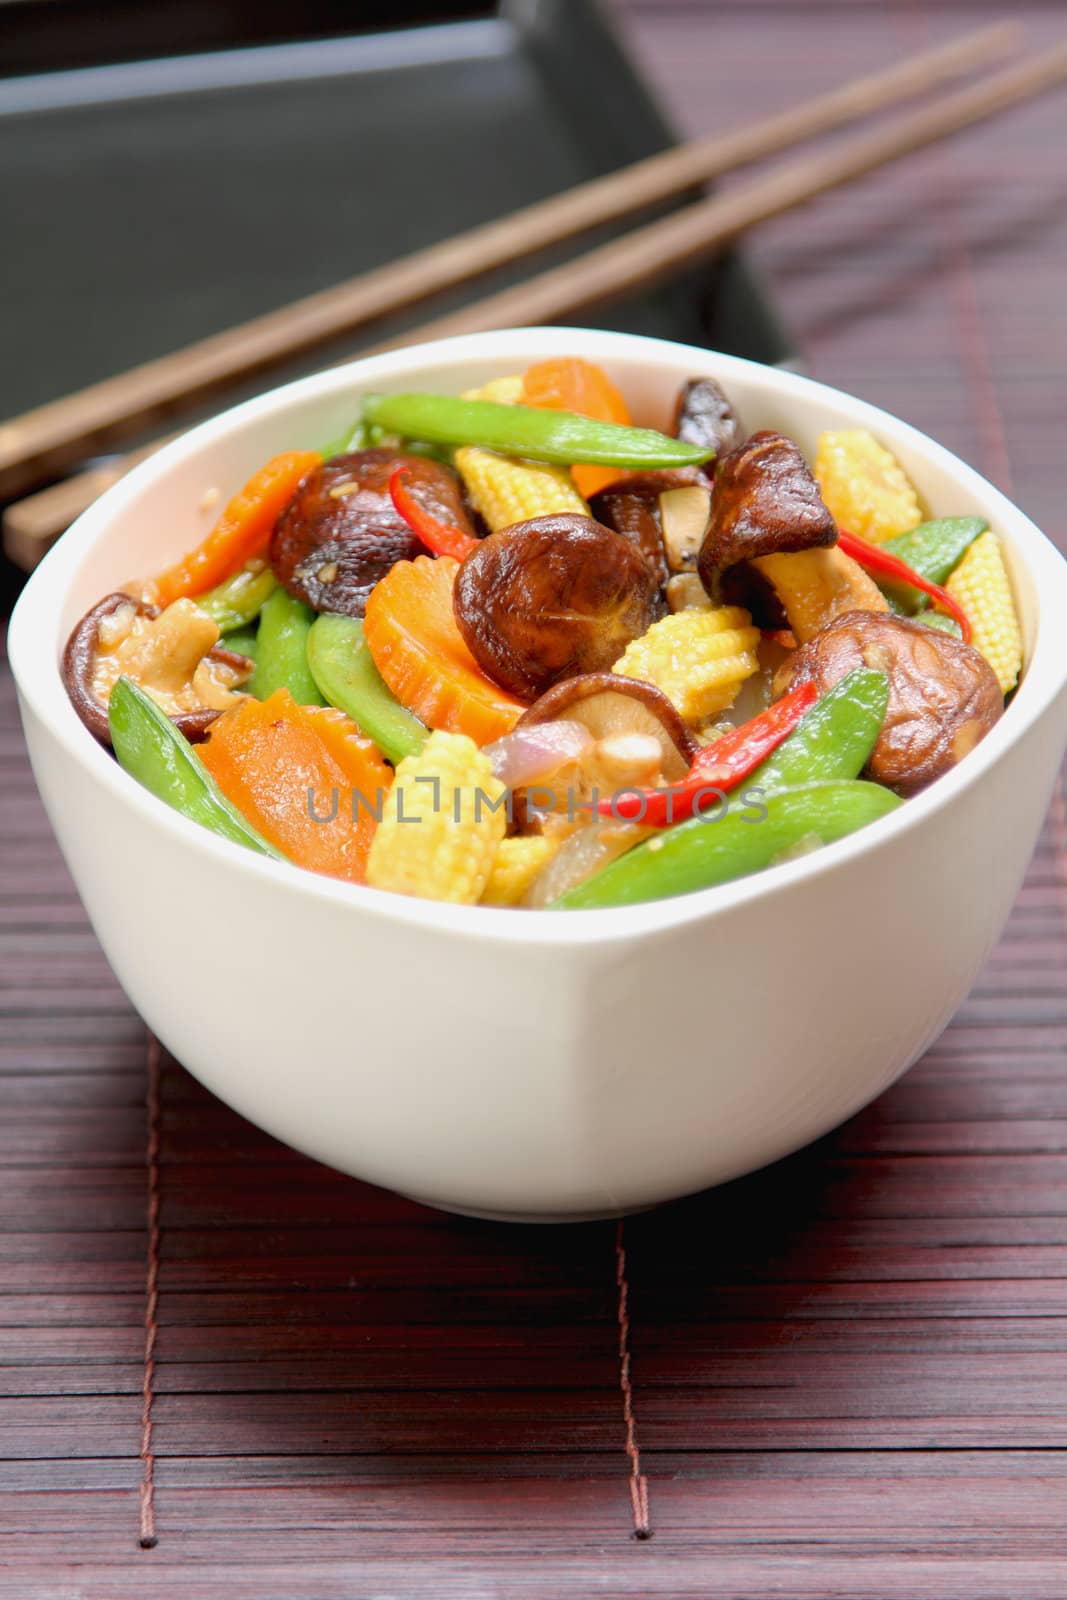 Stir fried vegetables with mushroom in white bowl by chopstick